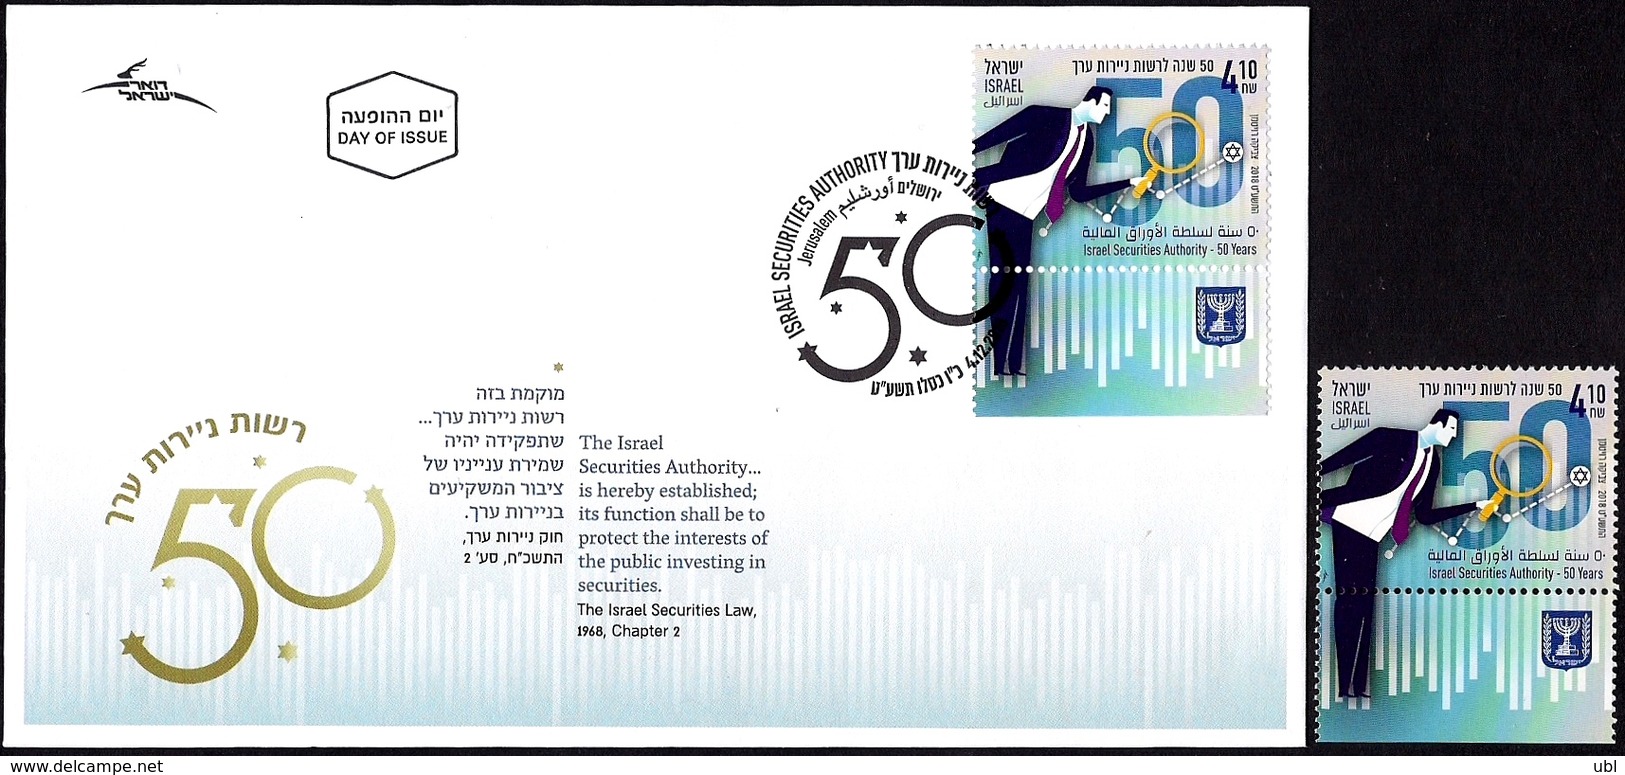 ISRAEL 2018 - Israel Securities Authority Jubilee - Finances - Stock Exchange - A Stamp With A Tab - MNH & FDC - Unclassified